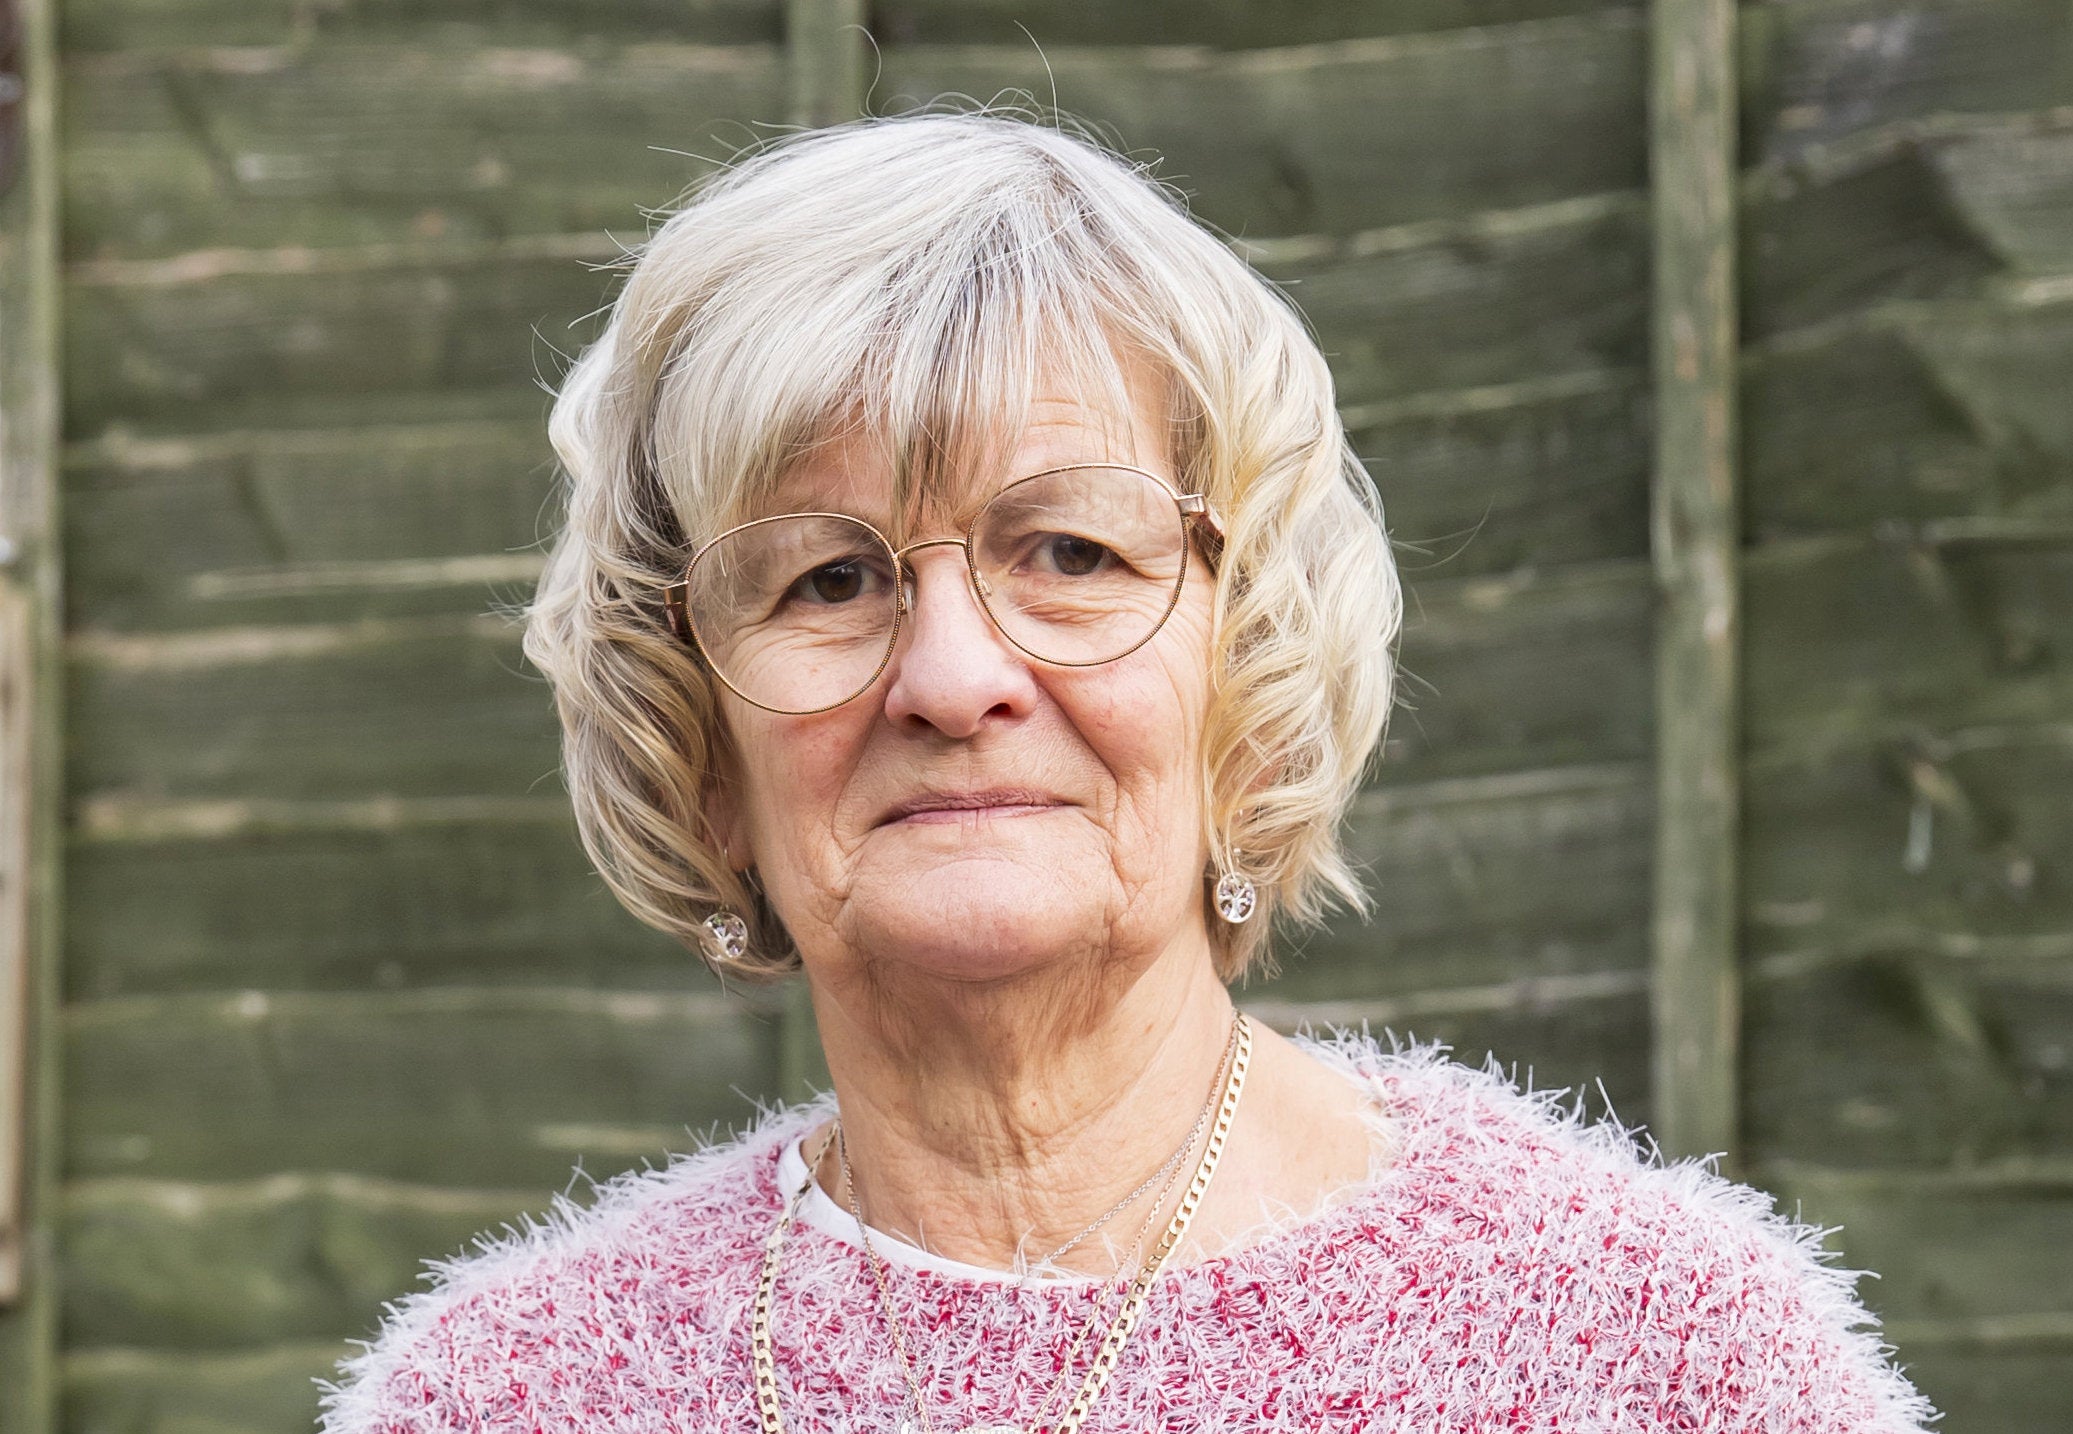 Pauline Yarranton, 68, received the fixed penalty notice for placing two small bags of jumpers and T-shirts next to the over-filled clothes bank